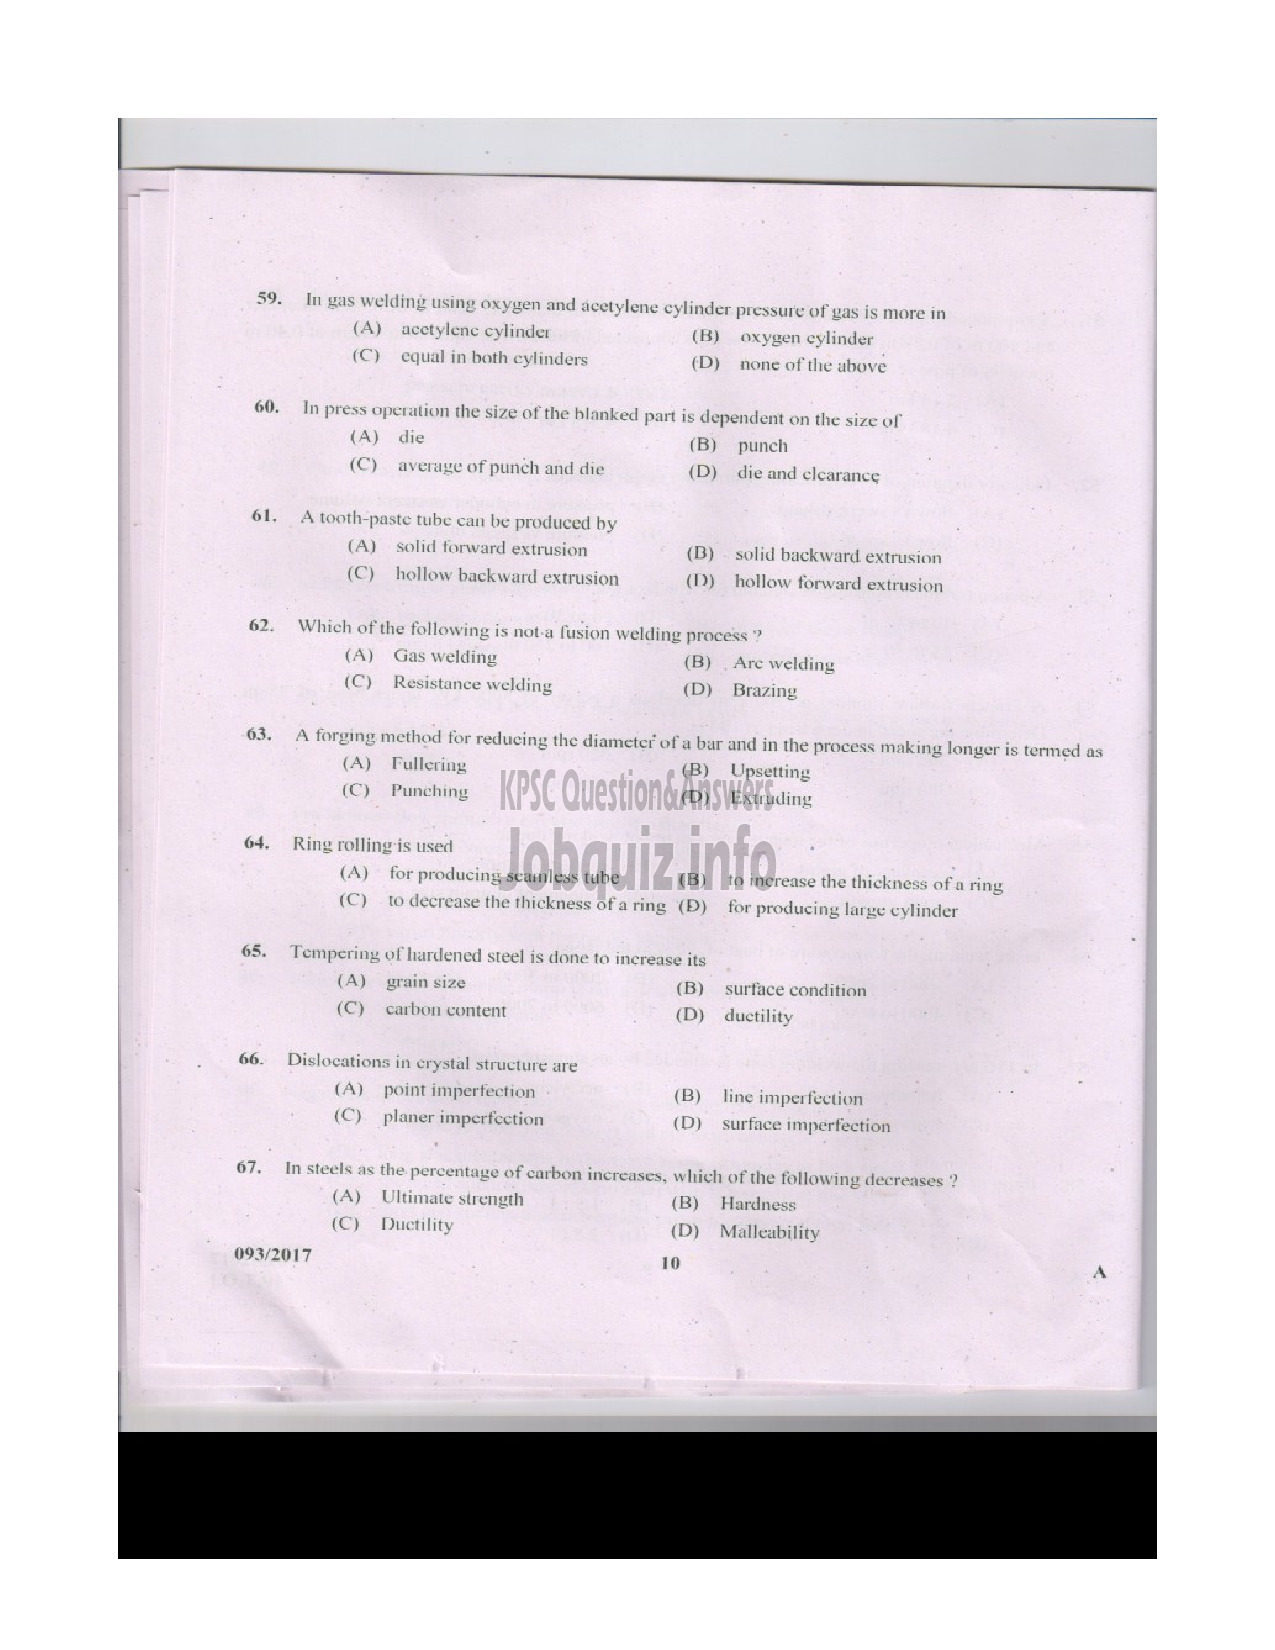 Kerala PSC Question Paper - INSTRUCTOR GRADE I MECHANICAL ENGINEERING ENGINEERING COLLEGES-9